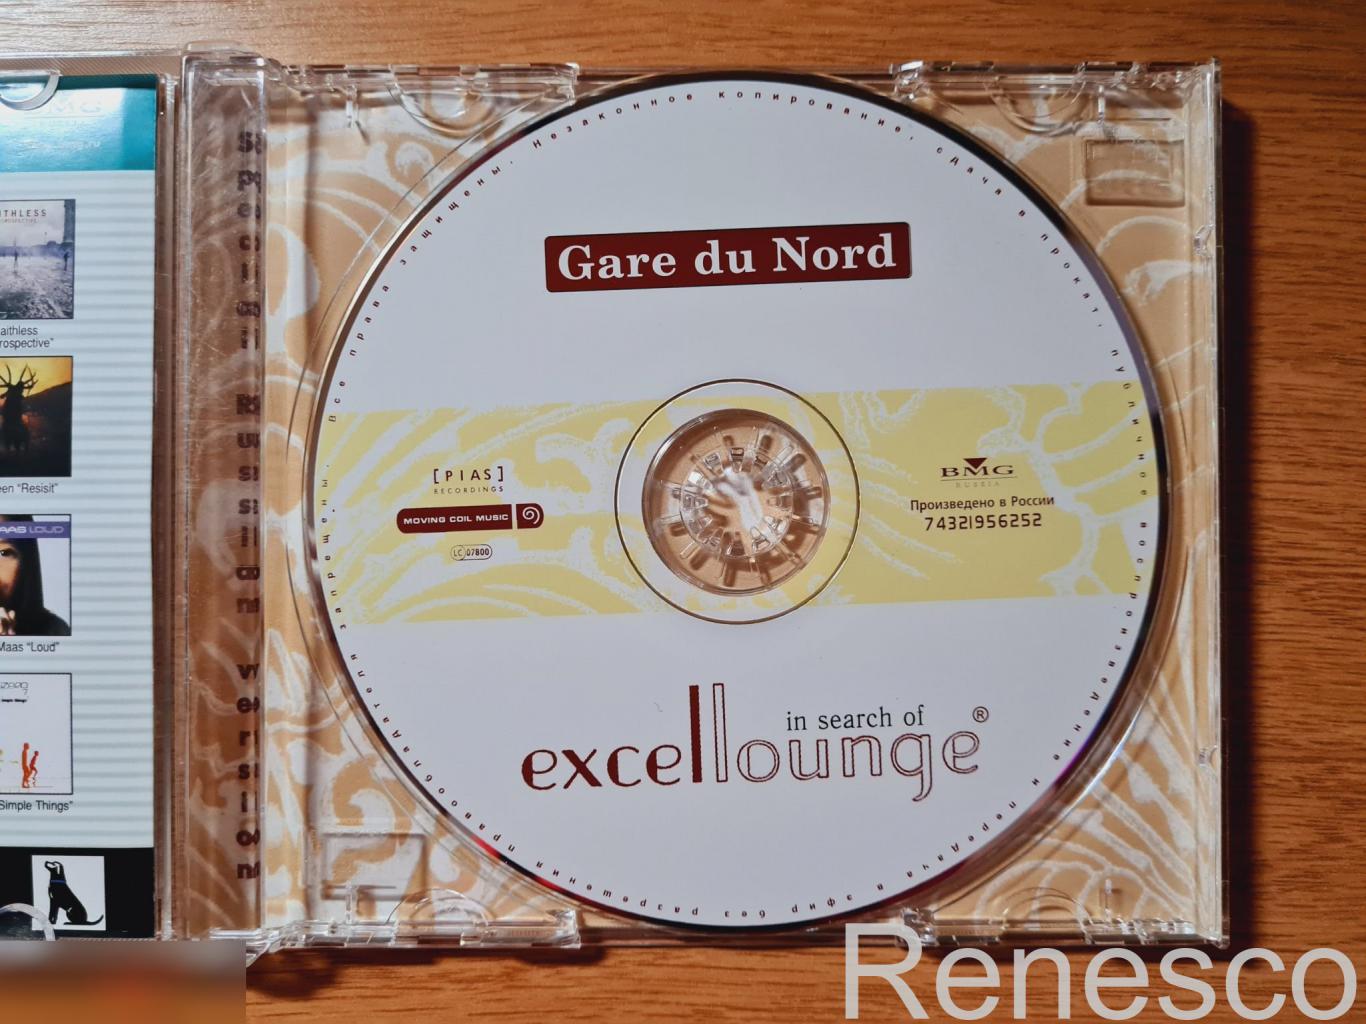 Gare Du Nord – In Search Of Excellounge (Russia) (2001) (Special Russian Version 4